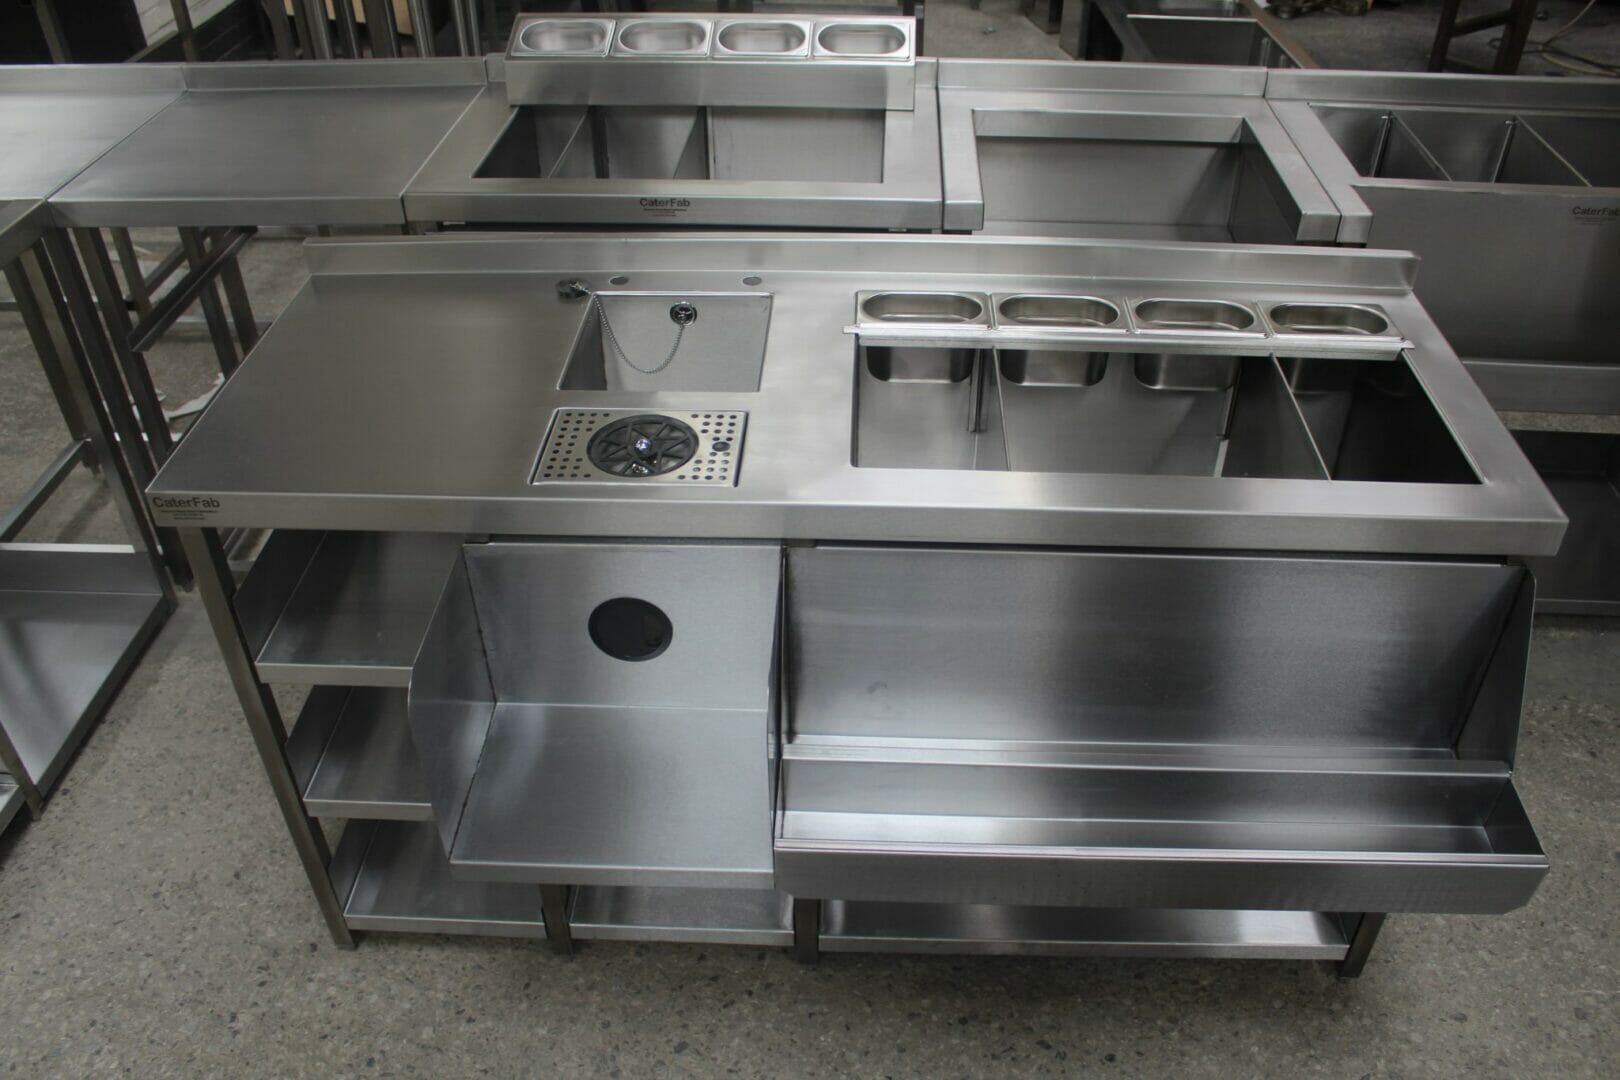 Caterfab Ltd is proud to present our modular, slide under bar system